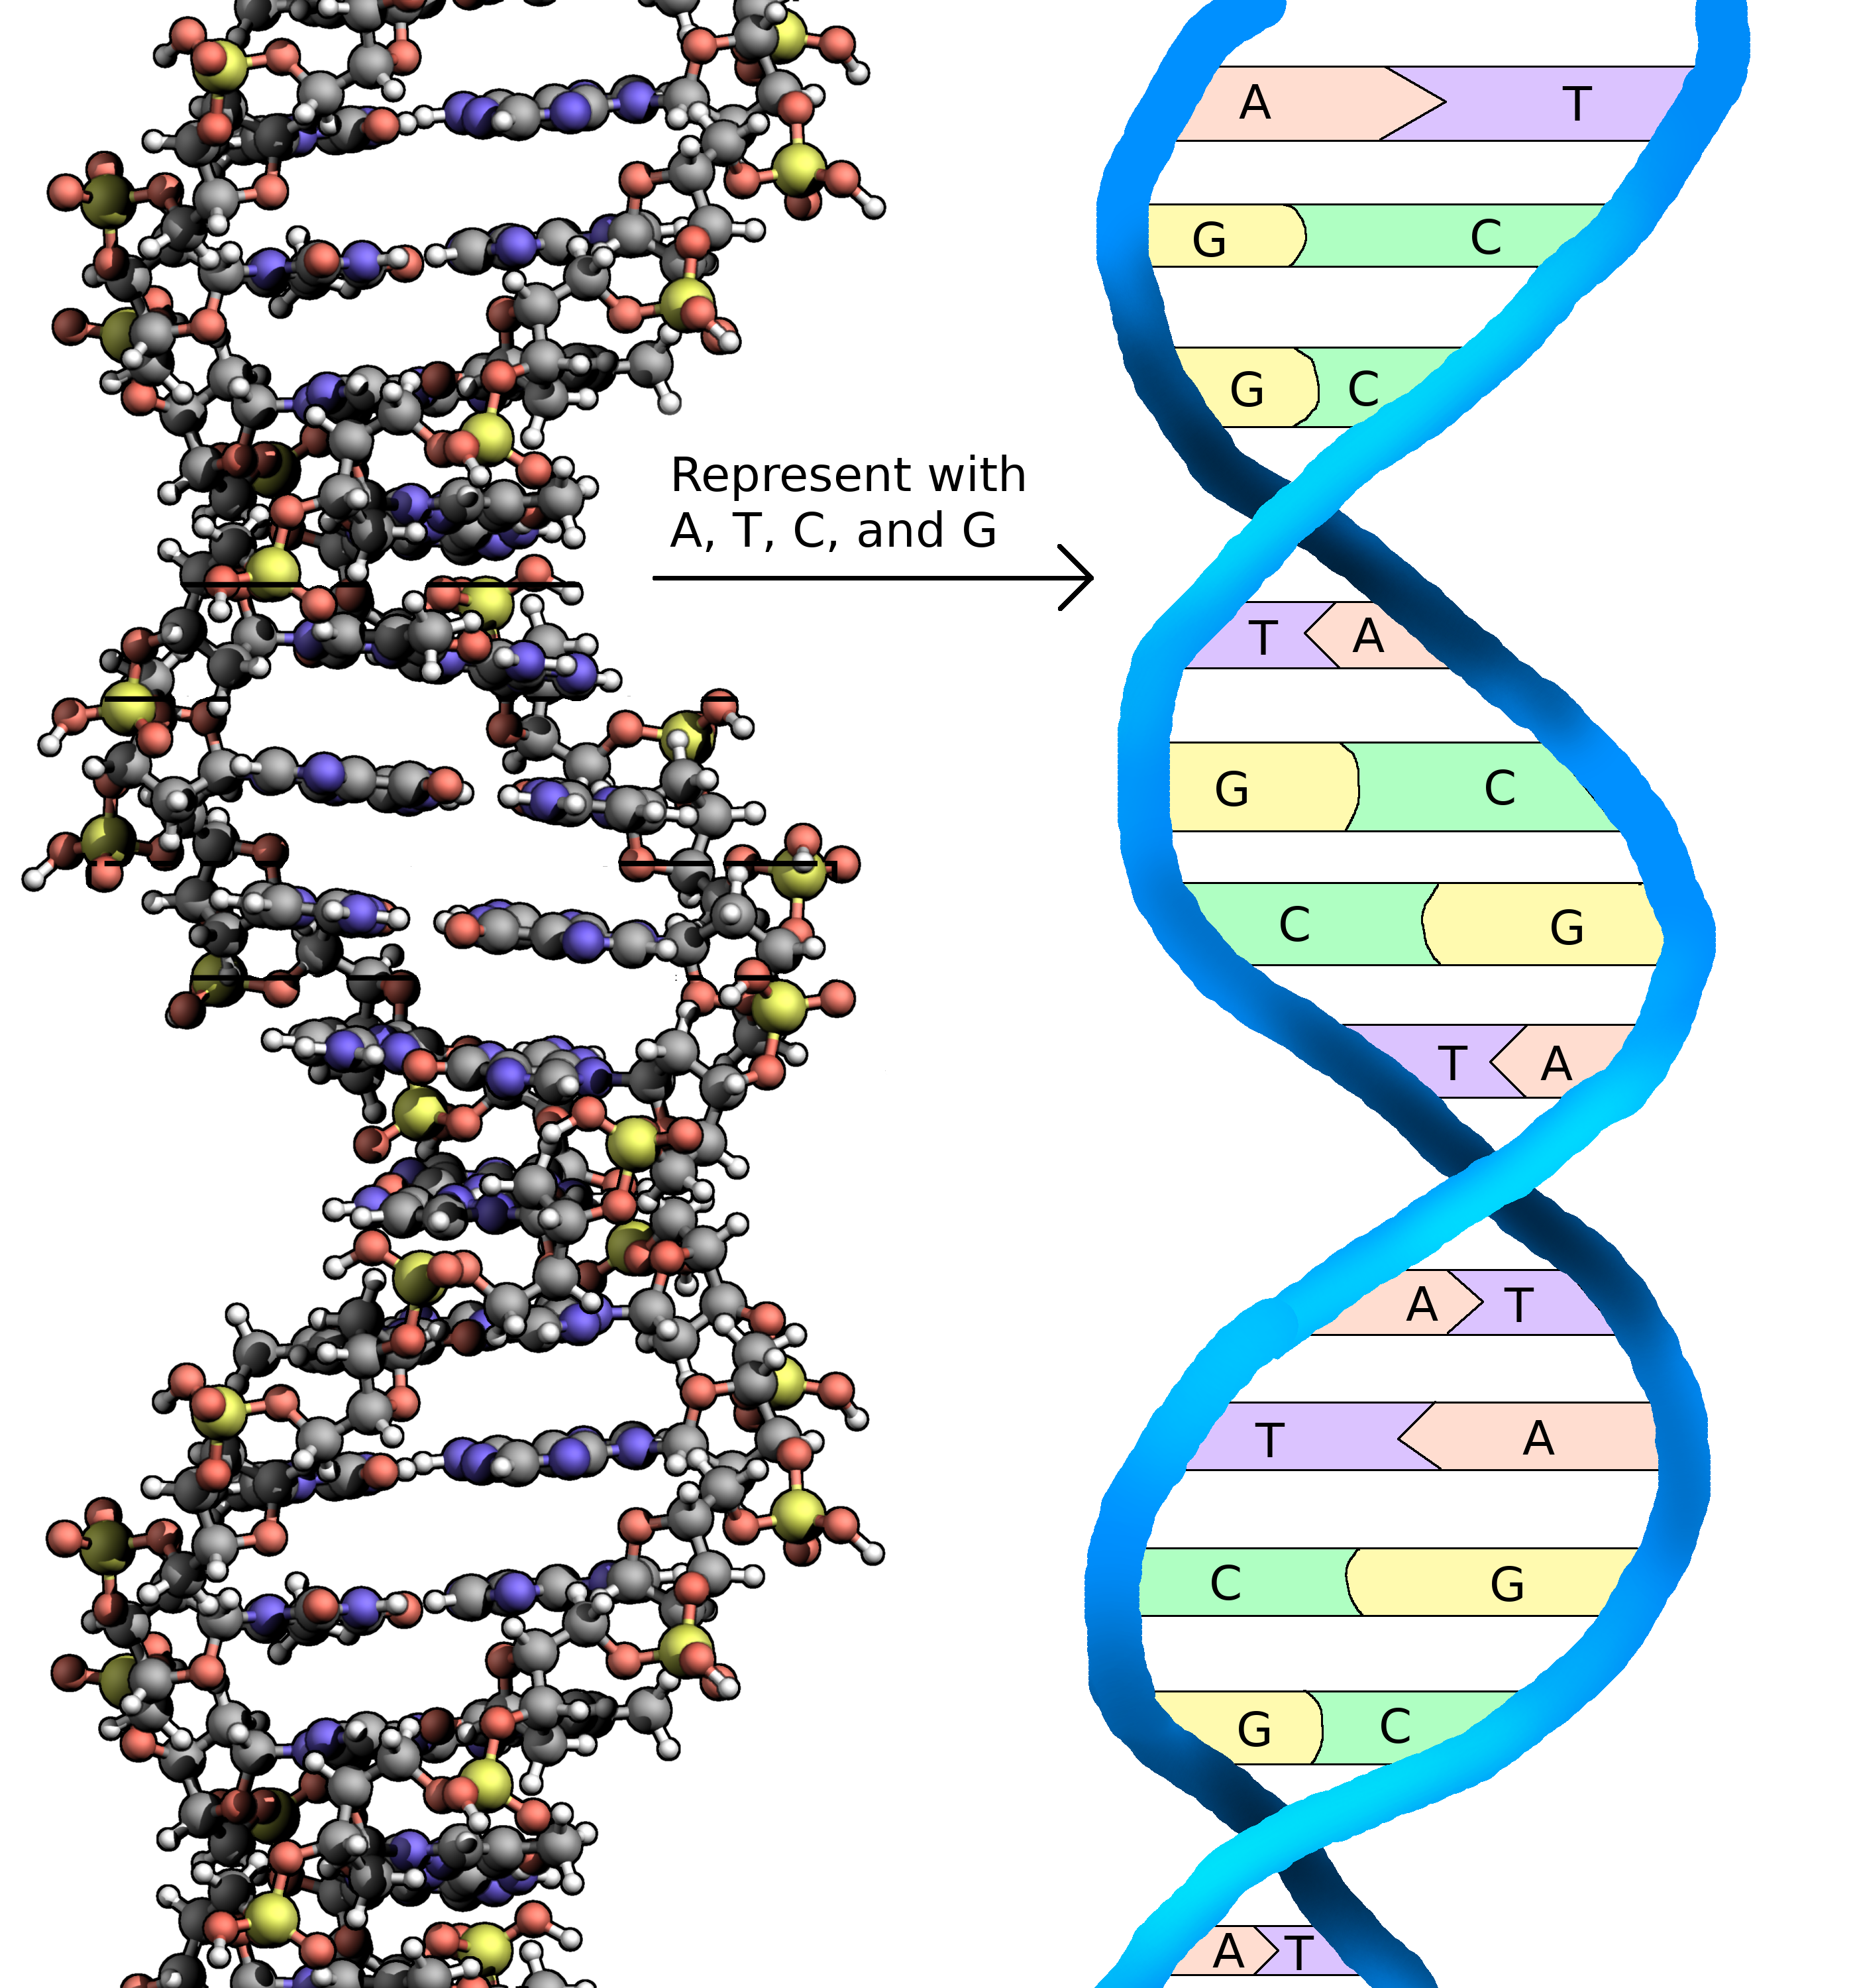 DNA molecule and representation with A, T, C, and G